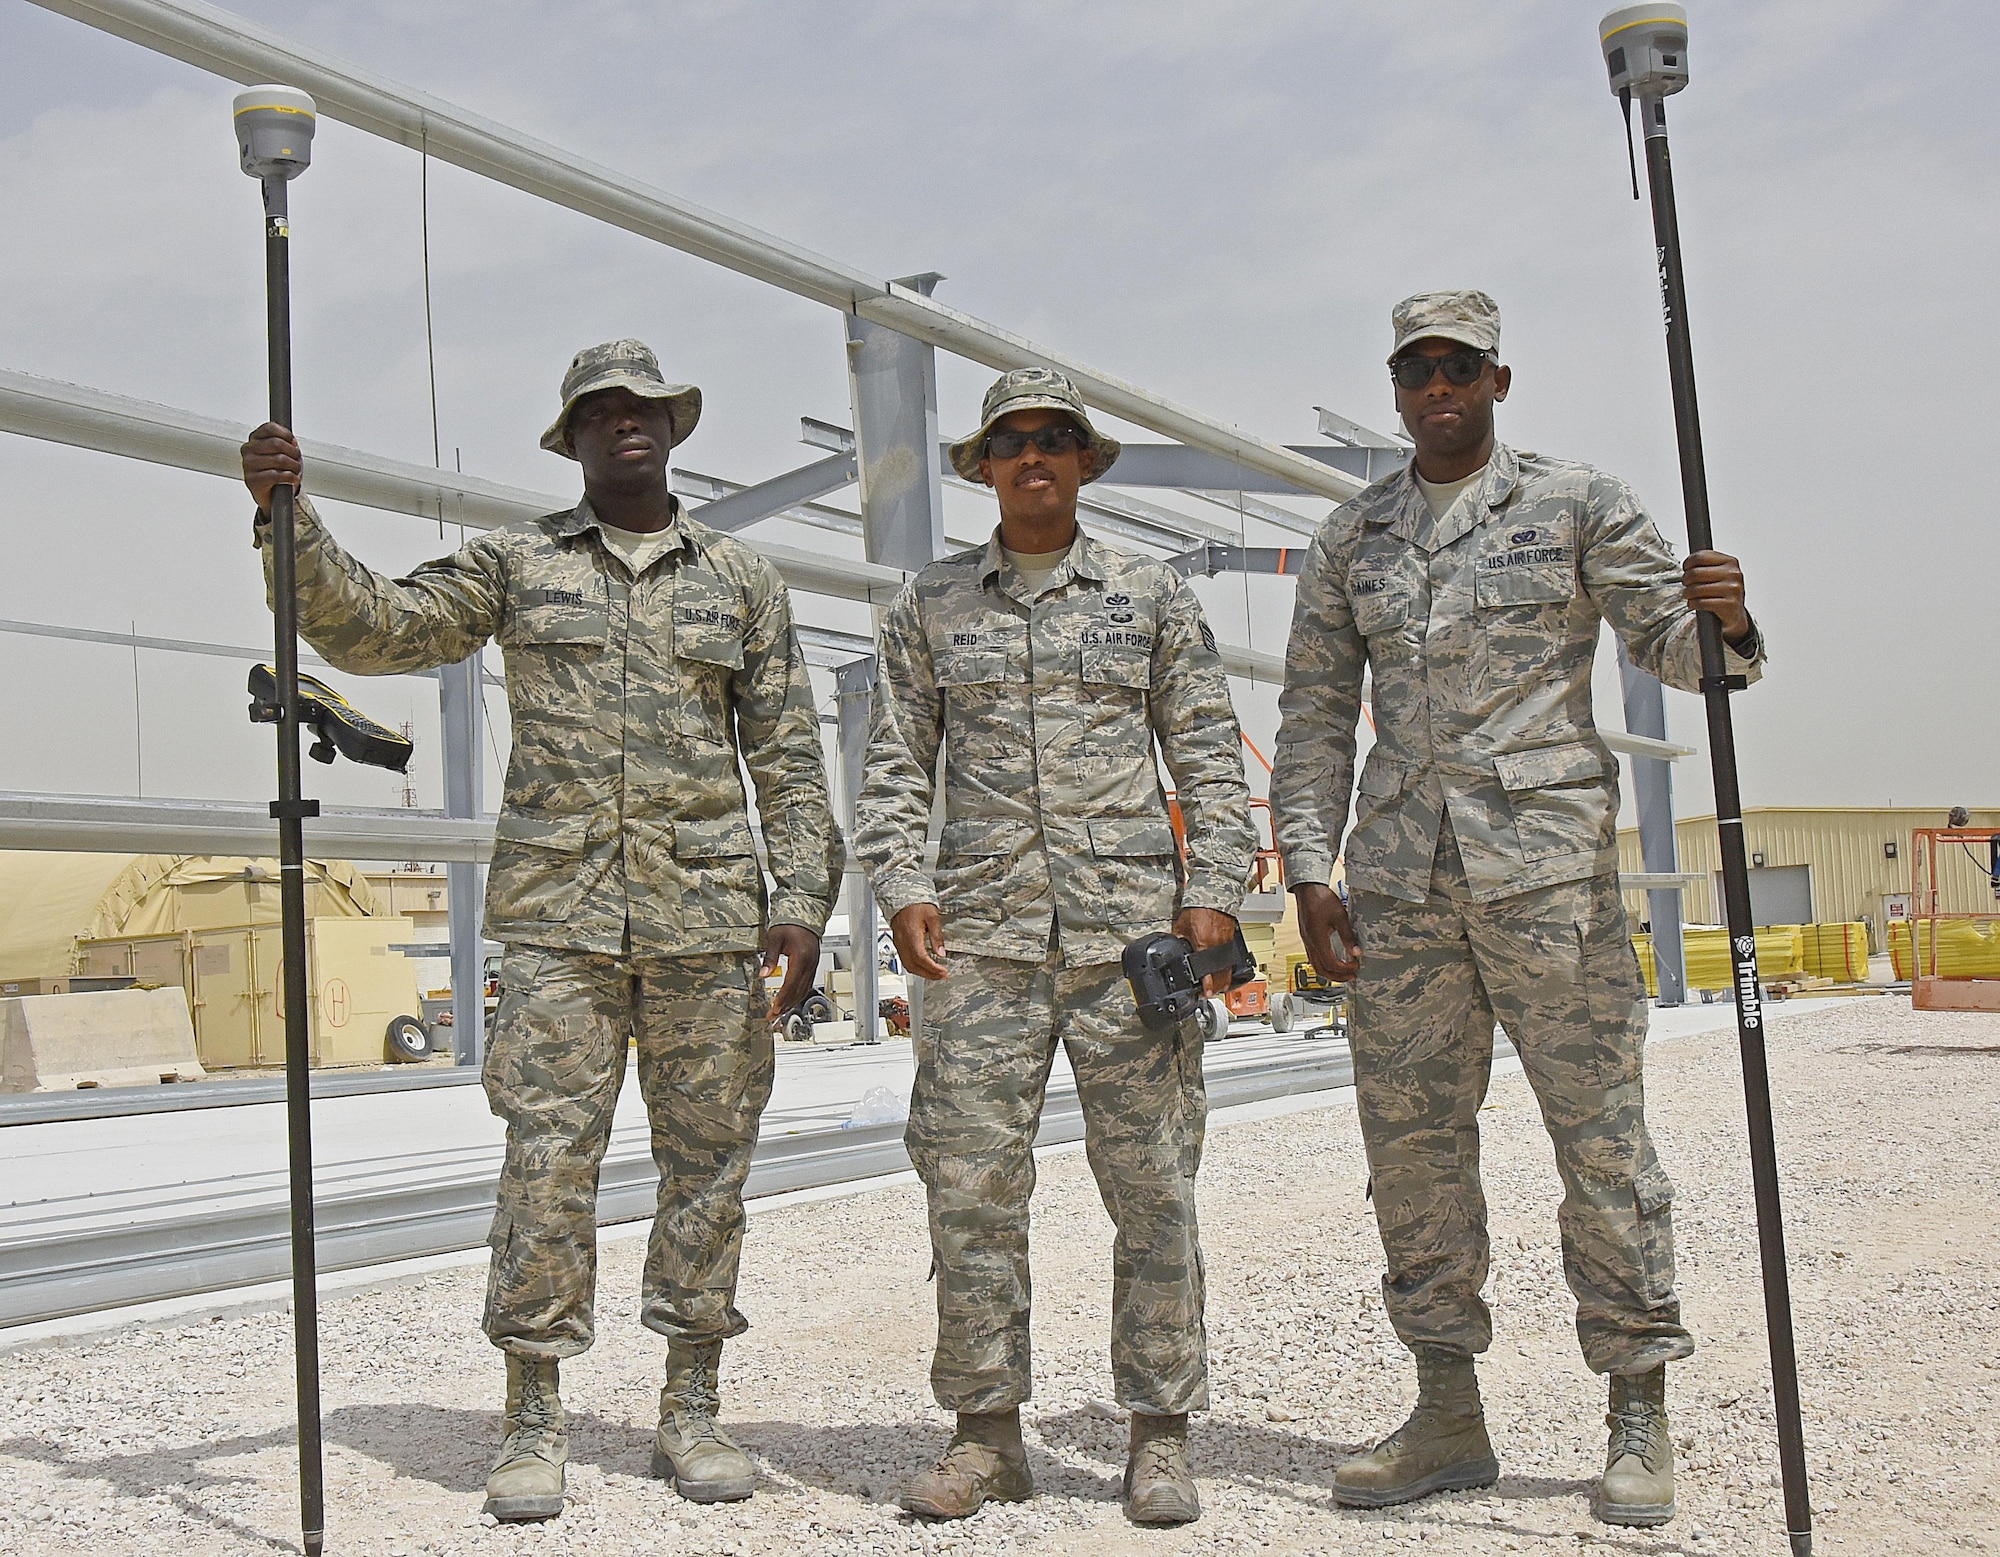 Engineer assistants with the 379th Expeditionary Civil Engineer Squadron GEOBASE section pose for a photo at Al Udeid Air Base, Qatar, March 15, 2017. Airmen with the GEOBASE section survey, map, draft and maintain common installation picture maps and have the ability to produce unit specific maps of Al Udeid AB.  (U.S. Air Force photo by Senior Airman Cynthia A. Innocenti)